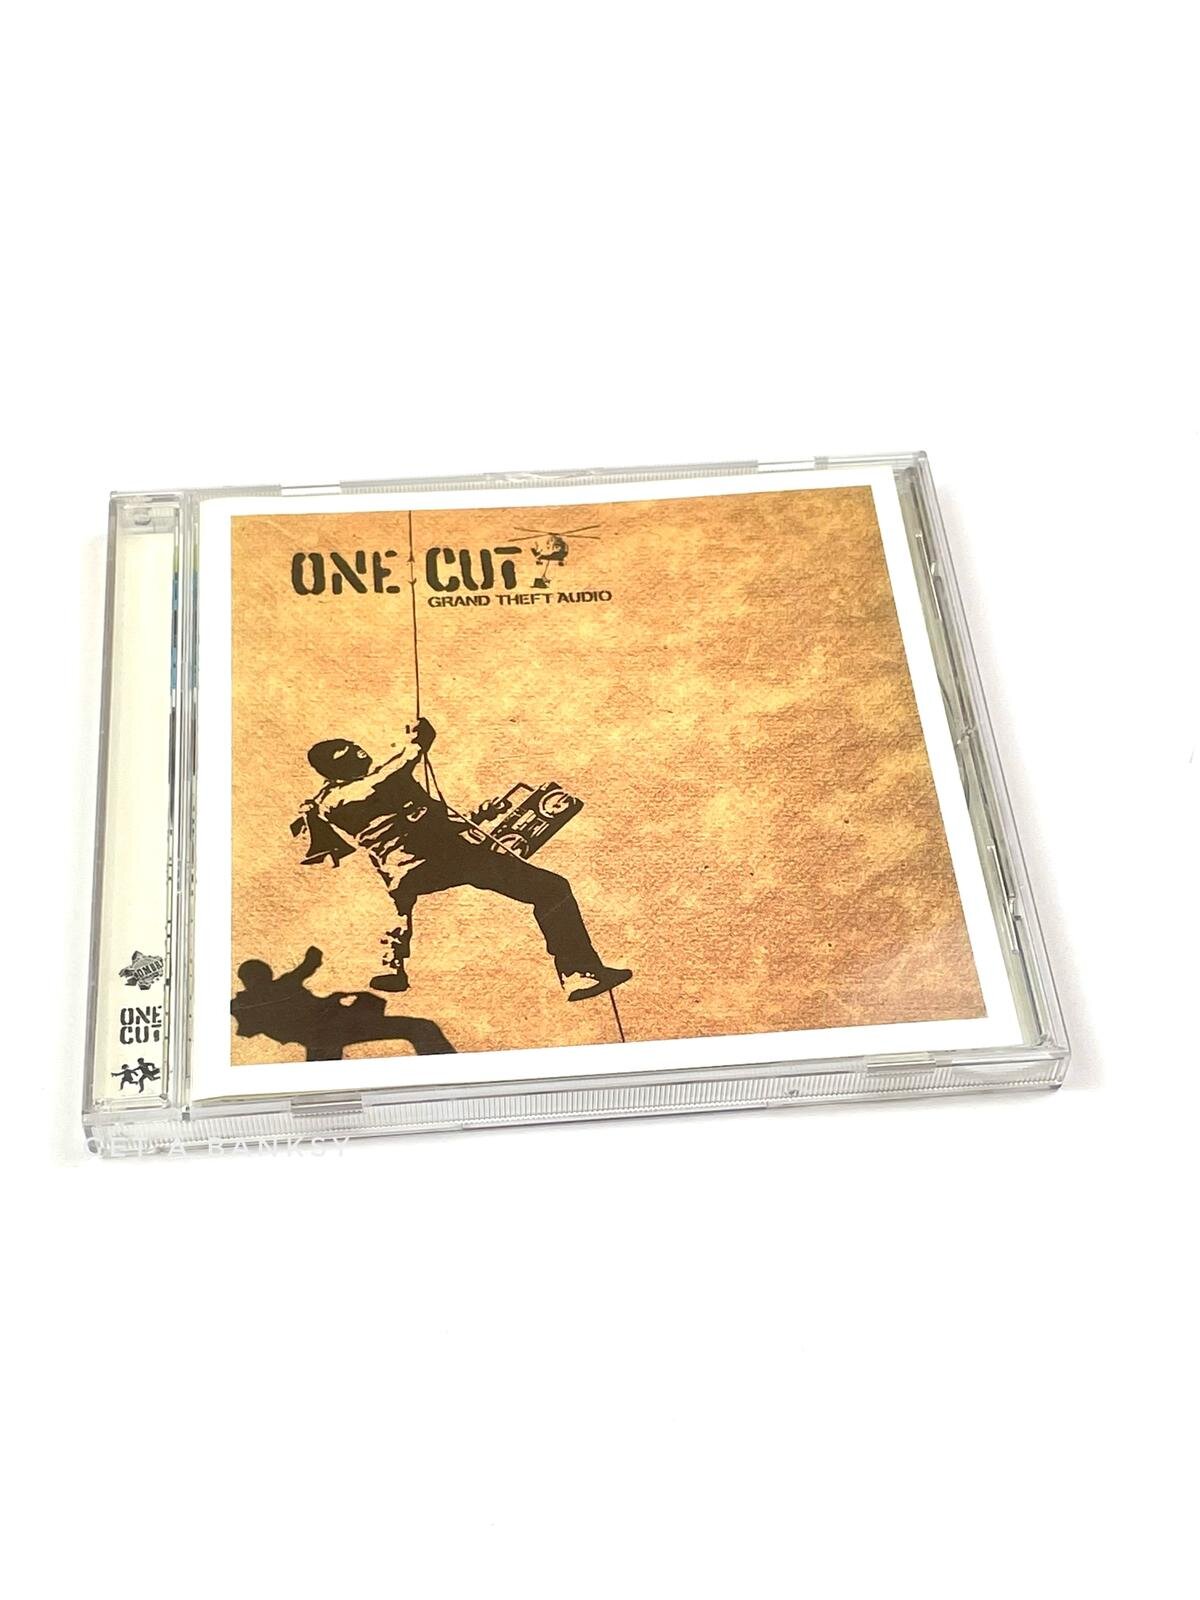 Onecut Grand Theft Audio CD — Get a Banksy